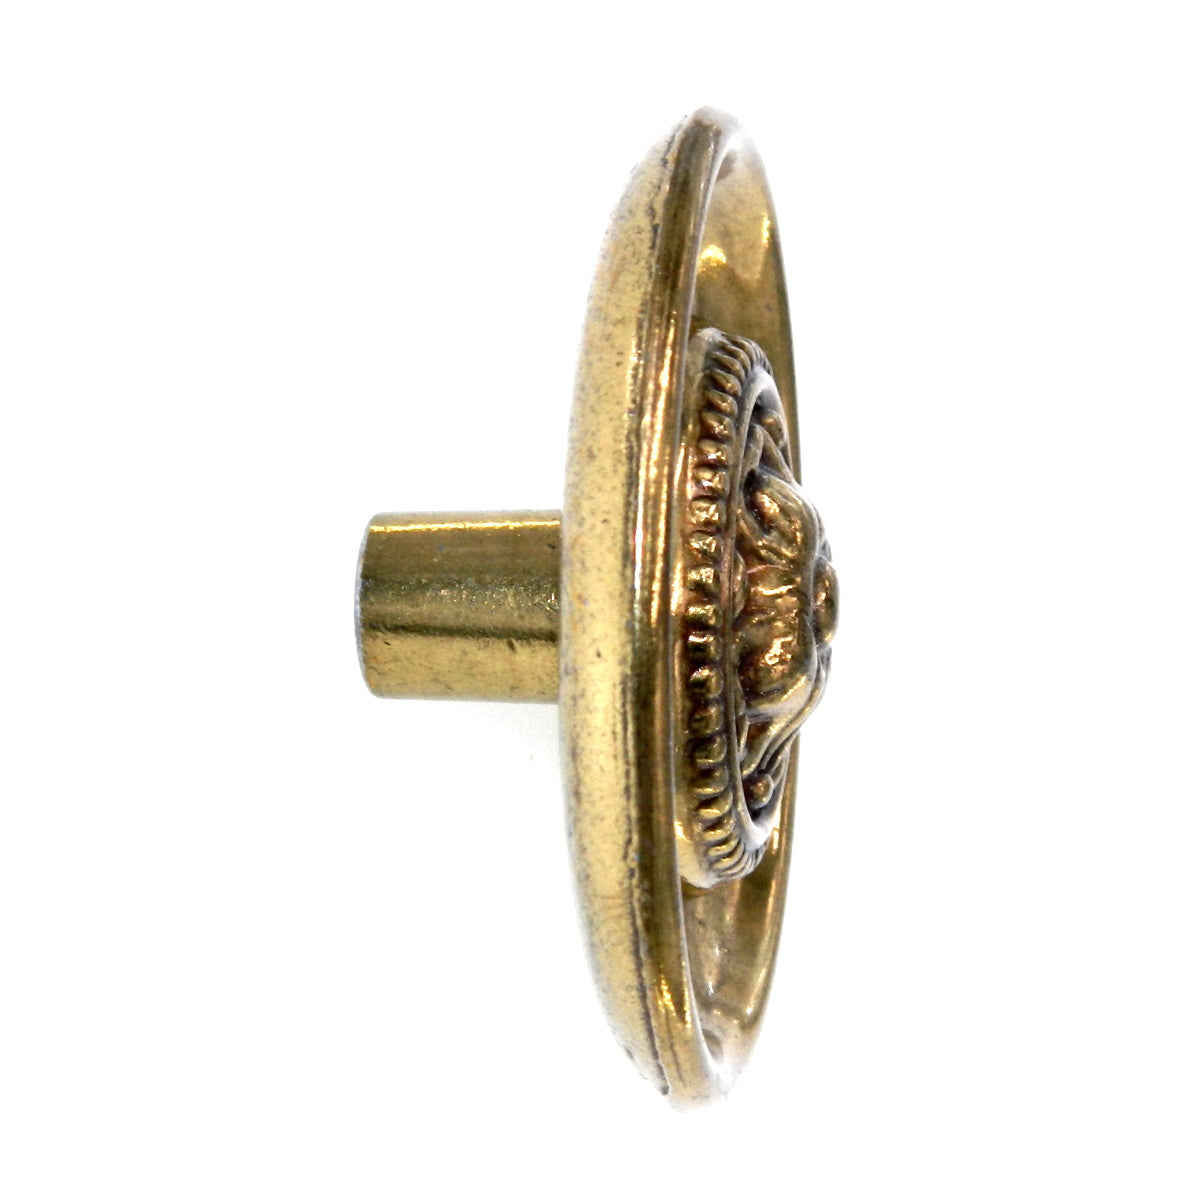 Belwith Manor House Lancaster Hand Polished Brass 2" Round Cabinet Knob 